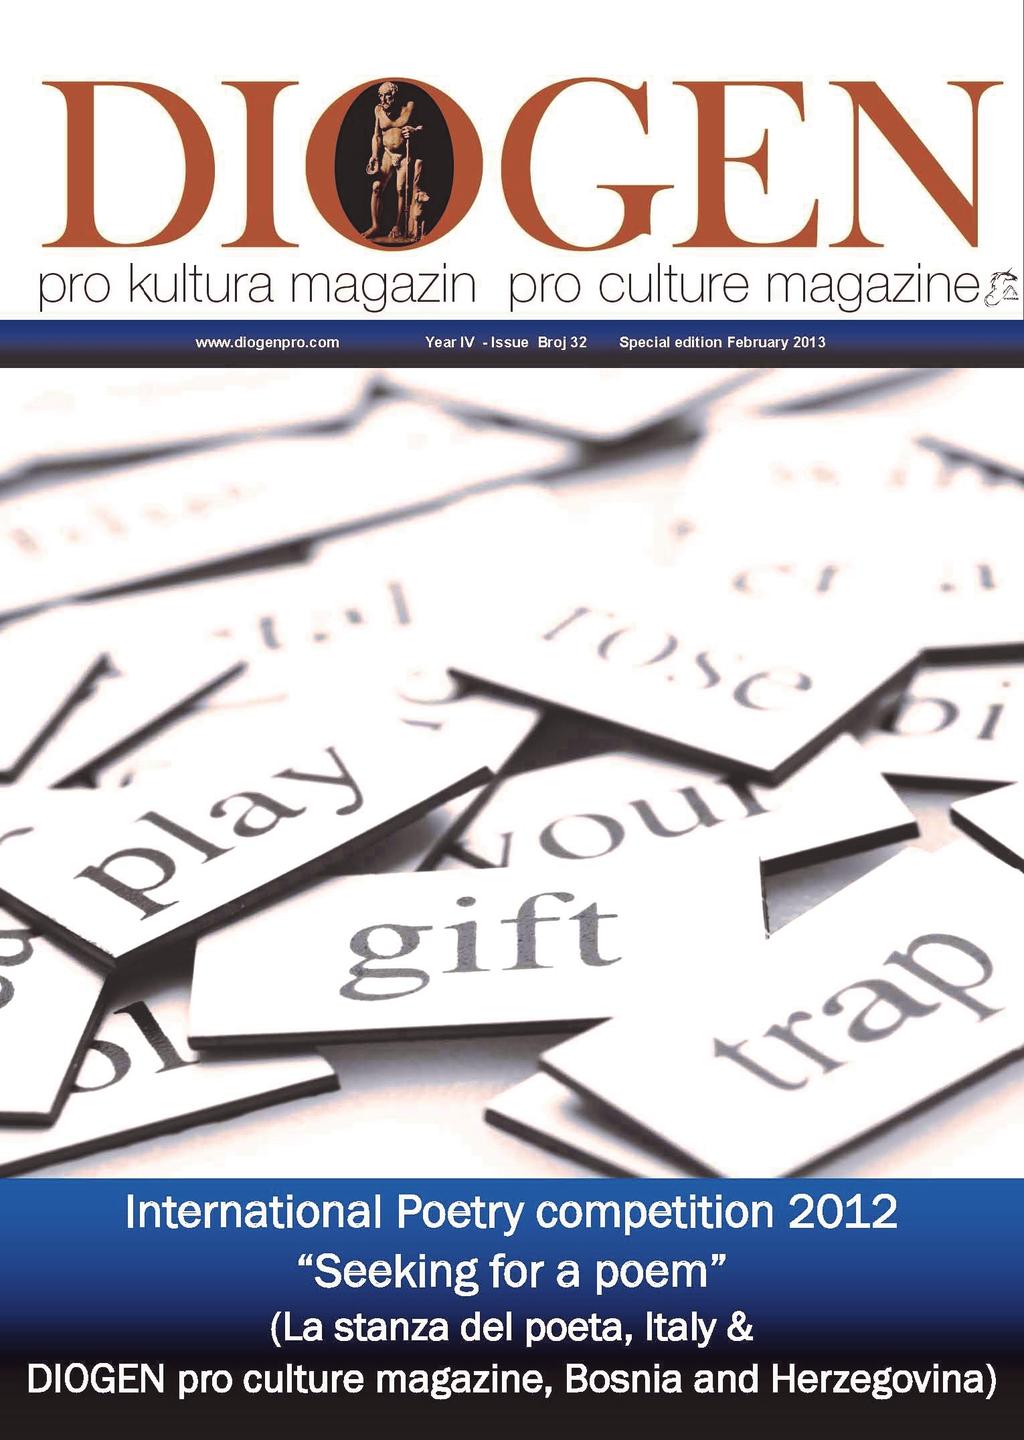 N O 38 P A G E 237 All 133 poets and poetess within 202 pages of the special edition of DIOGEN pro